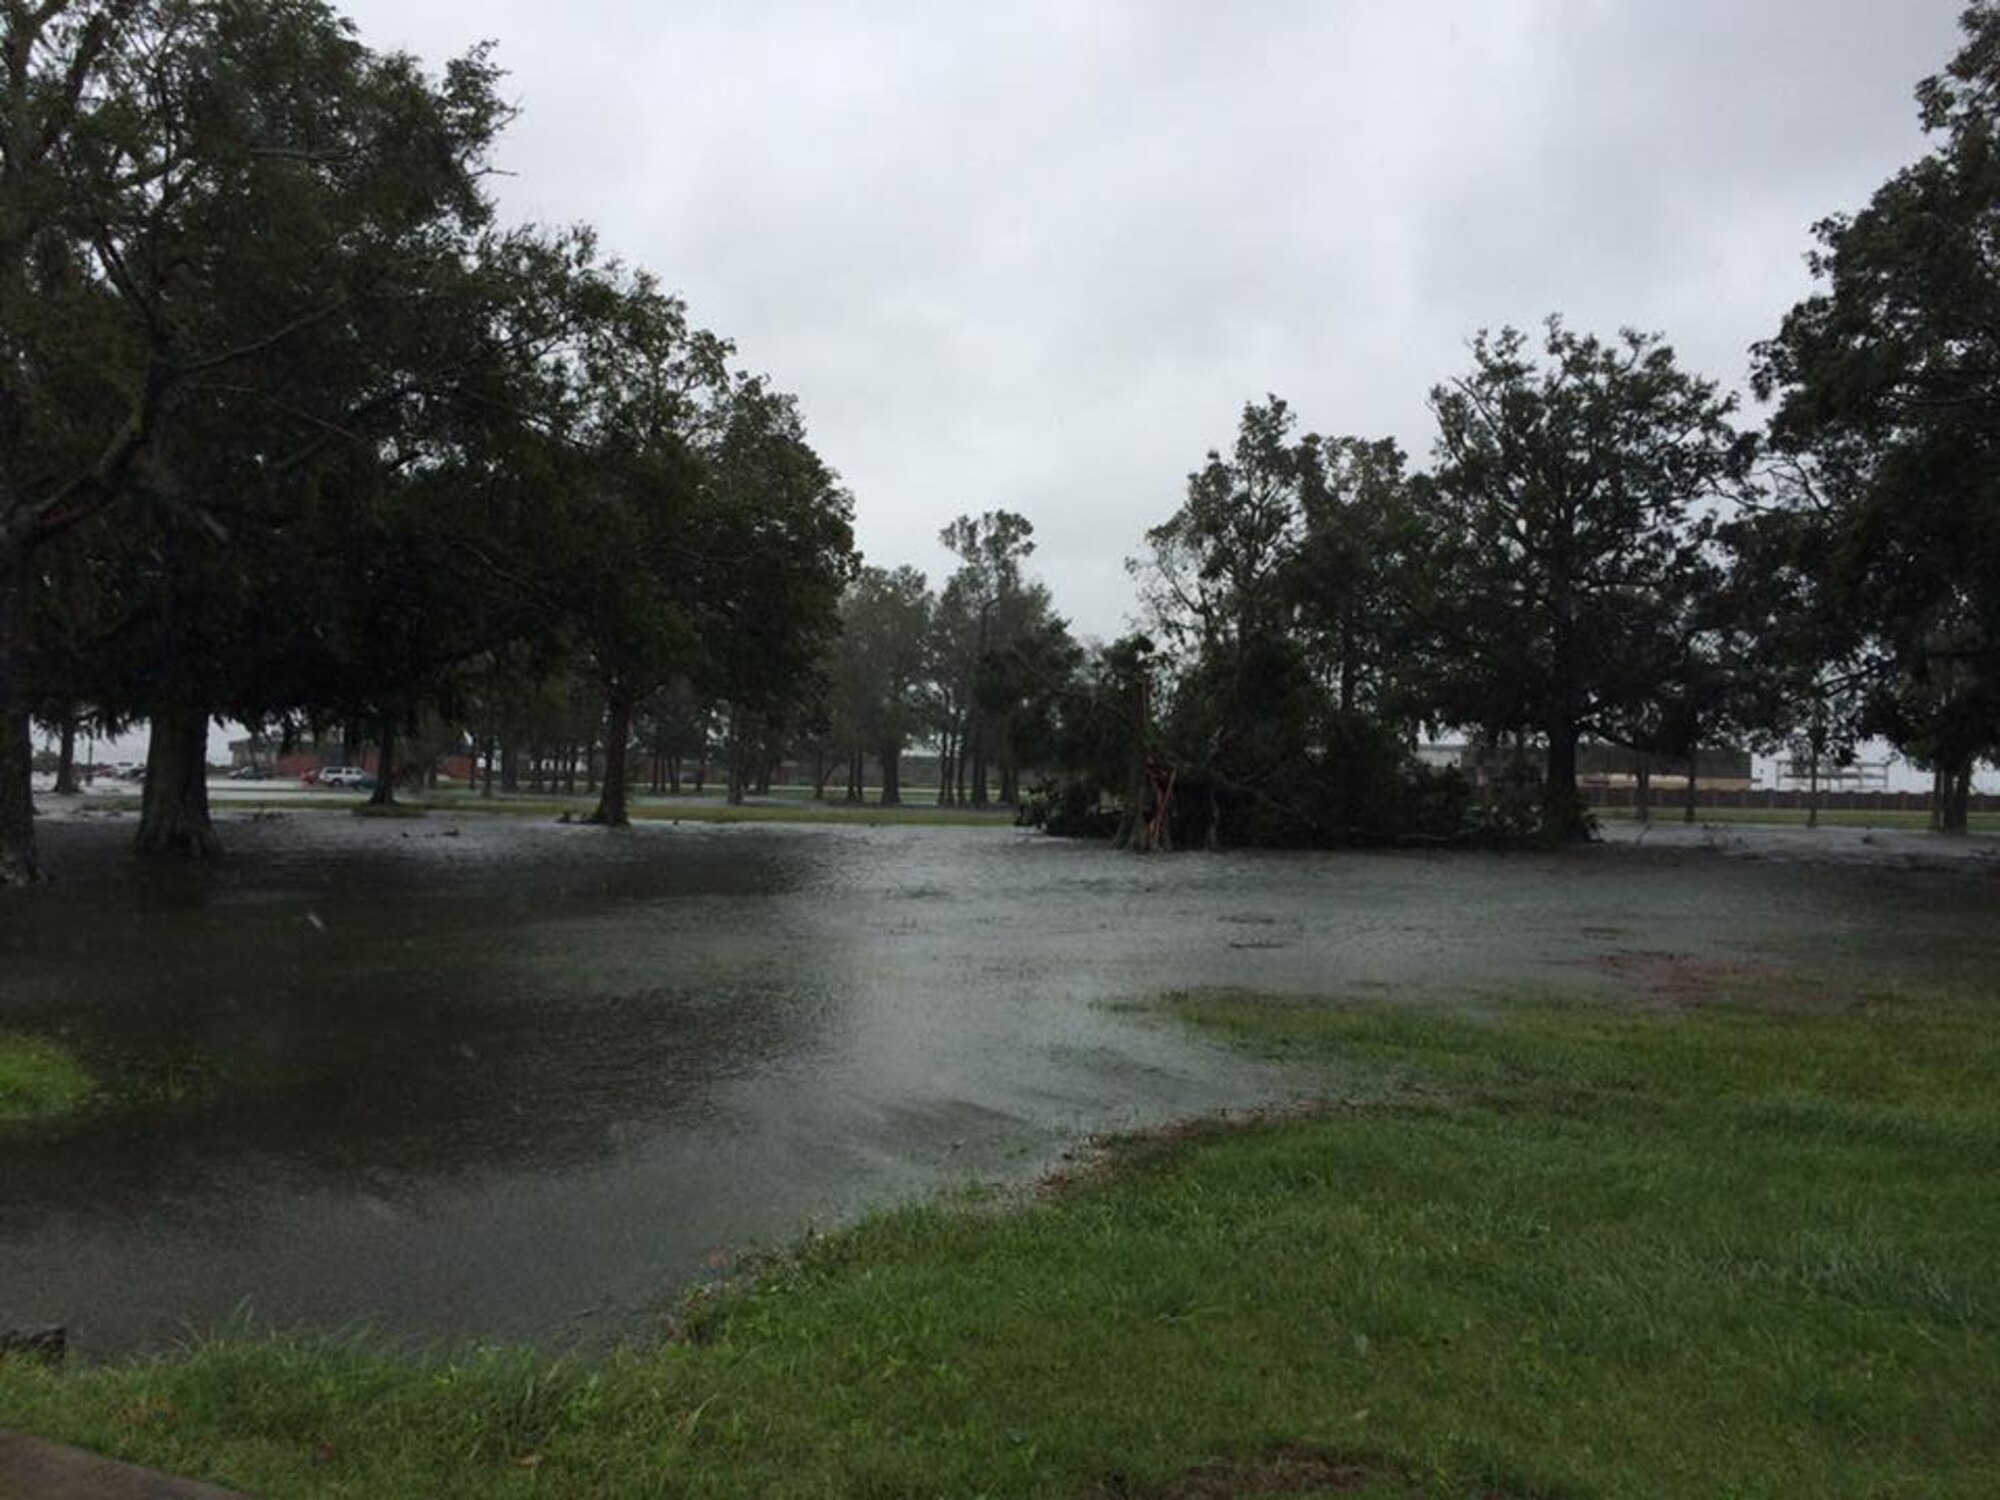 The low-lying grass area across the street from the Aerial Port was flooded as a result of Hurricane Mathew Oct. 8.